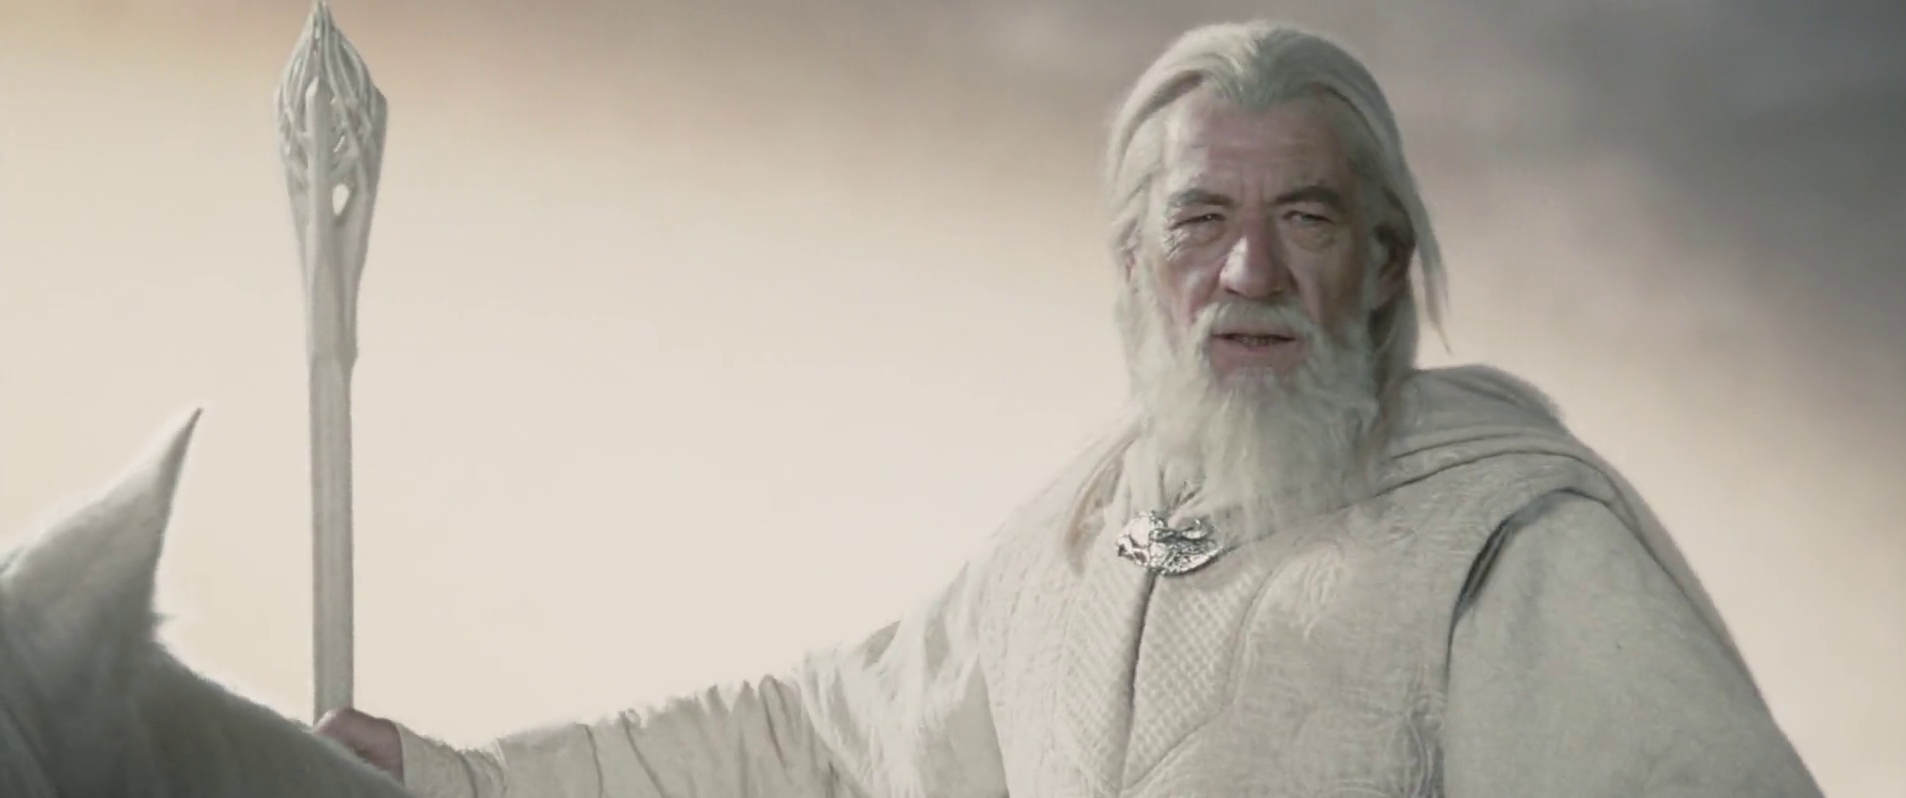 White Space—Your Gandalf at Helm's Deep | by Tayler Tanner | Medium